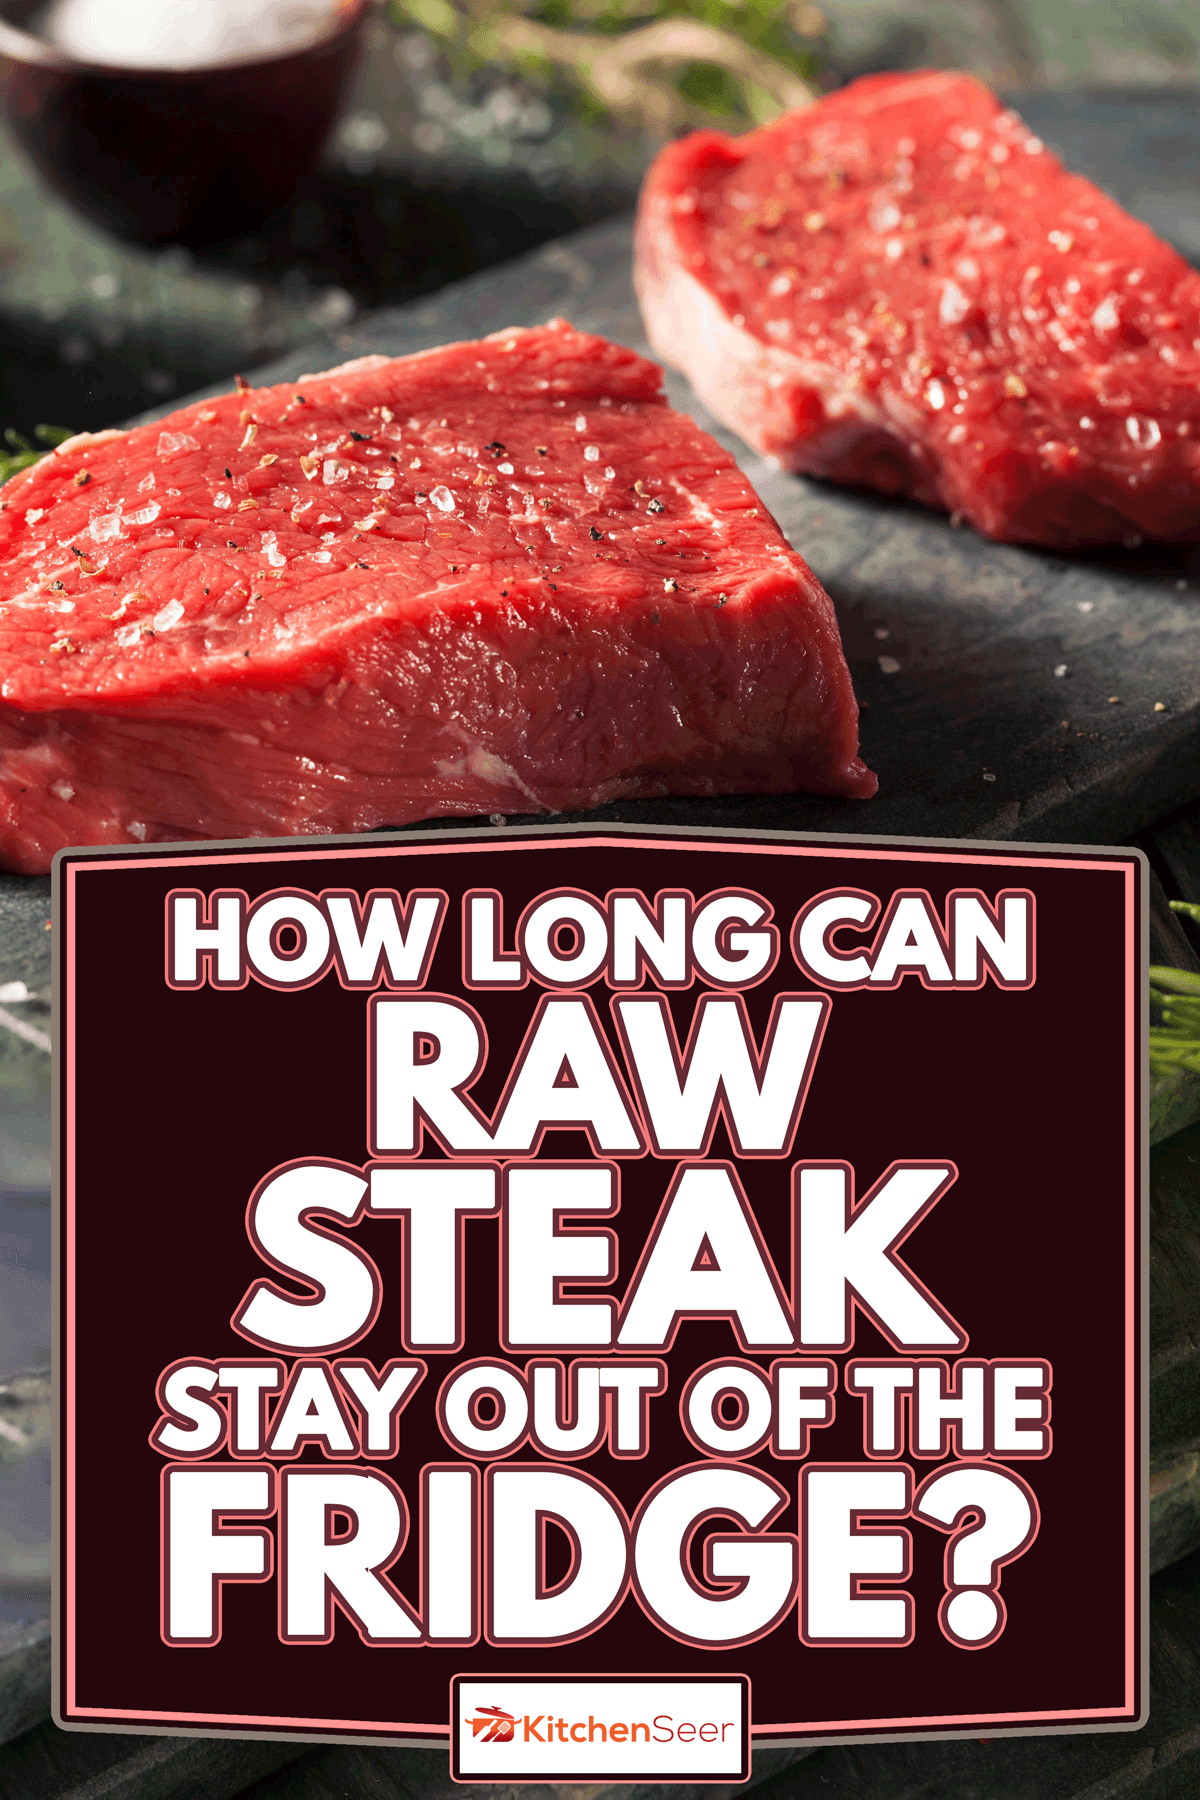 Raw organic grass feed sirloin steak, How Long Can Raw Steak Stay Out of the Fridge?